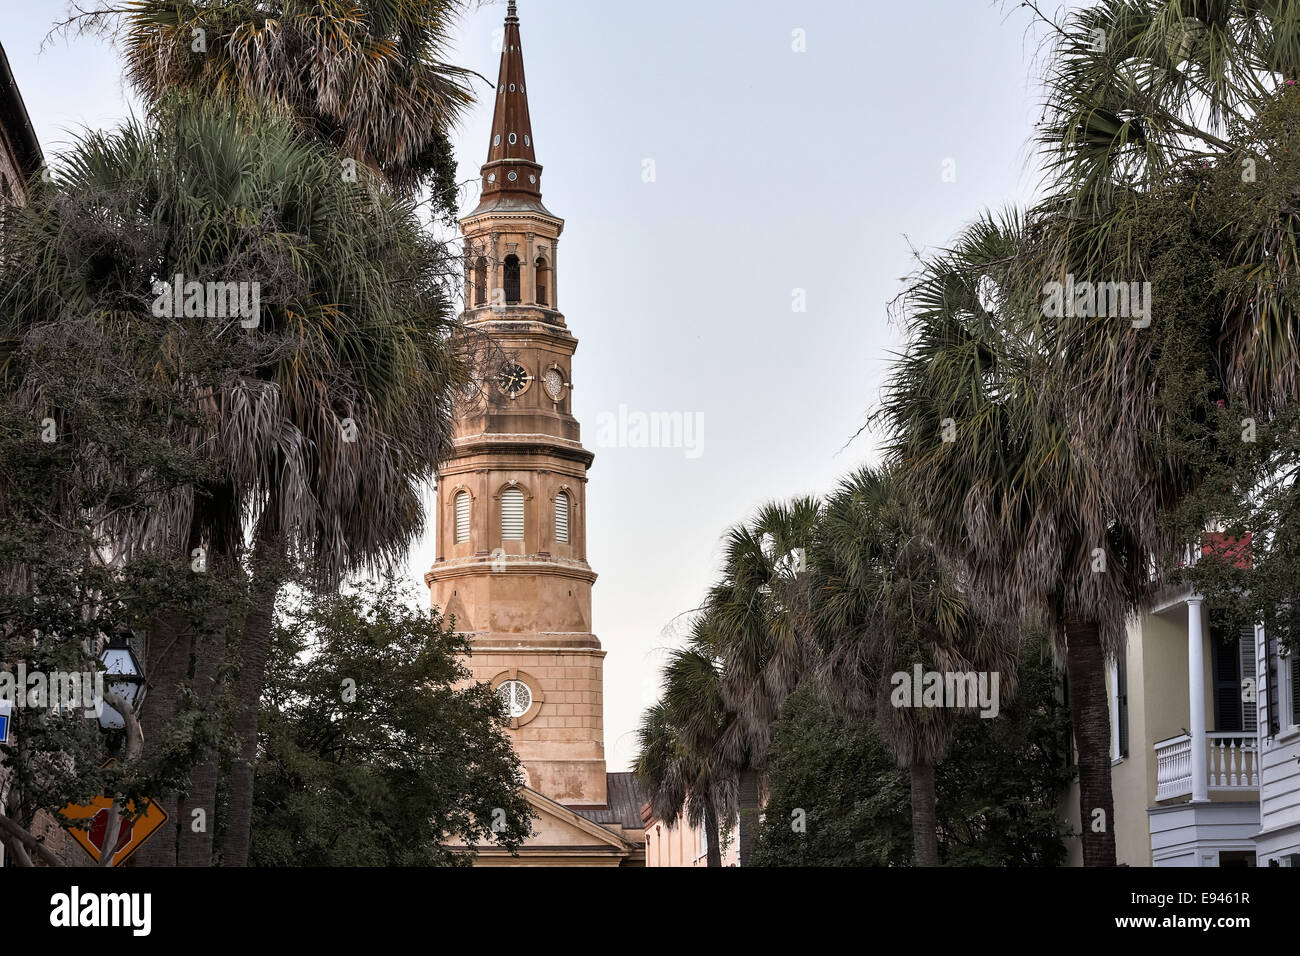 St Philips church steeple early morning in historic Charleston, SC. Stock Photo